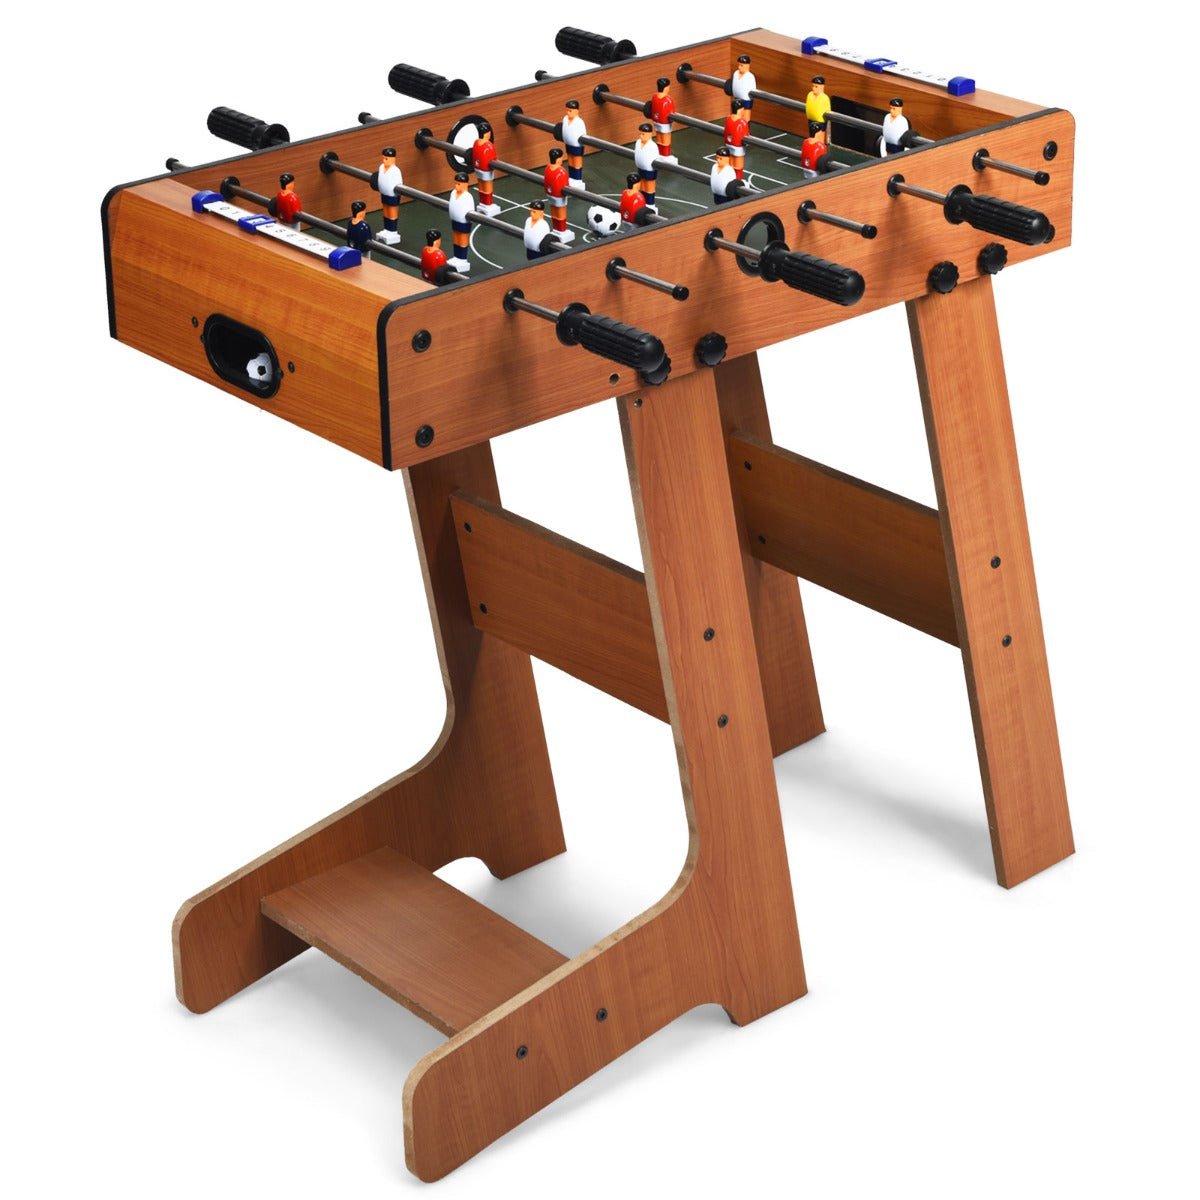 Shop the Folding Foosball Table - Perfect for Game Rooms